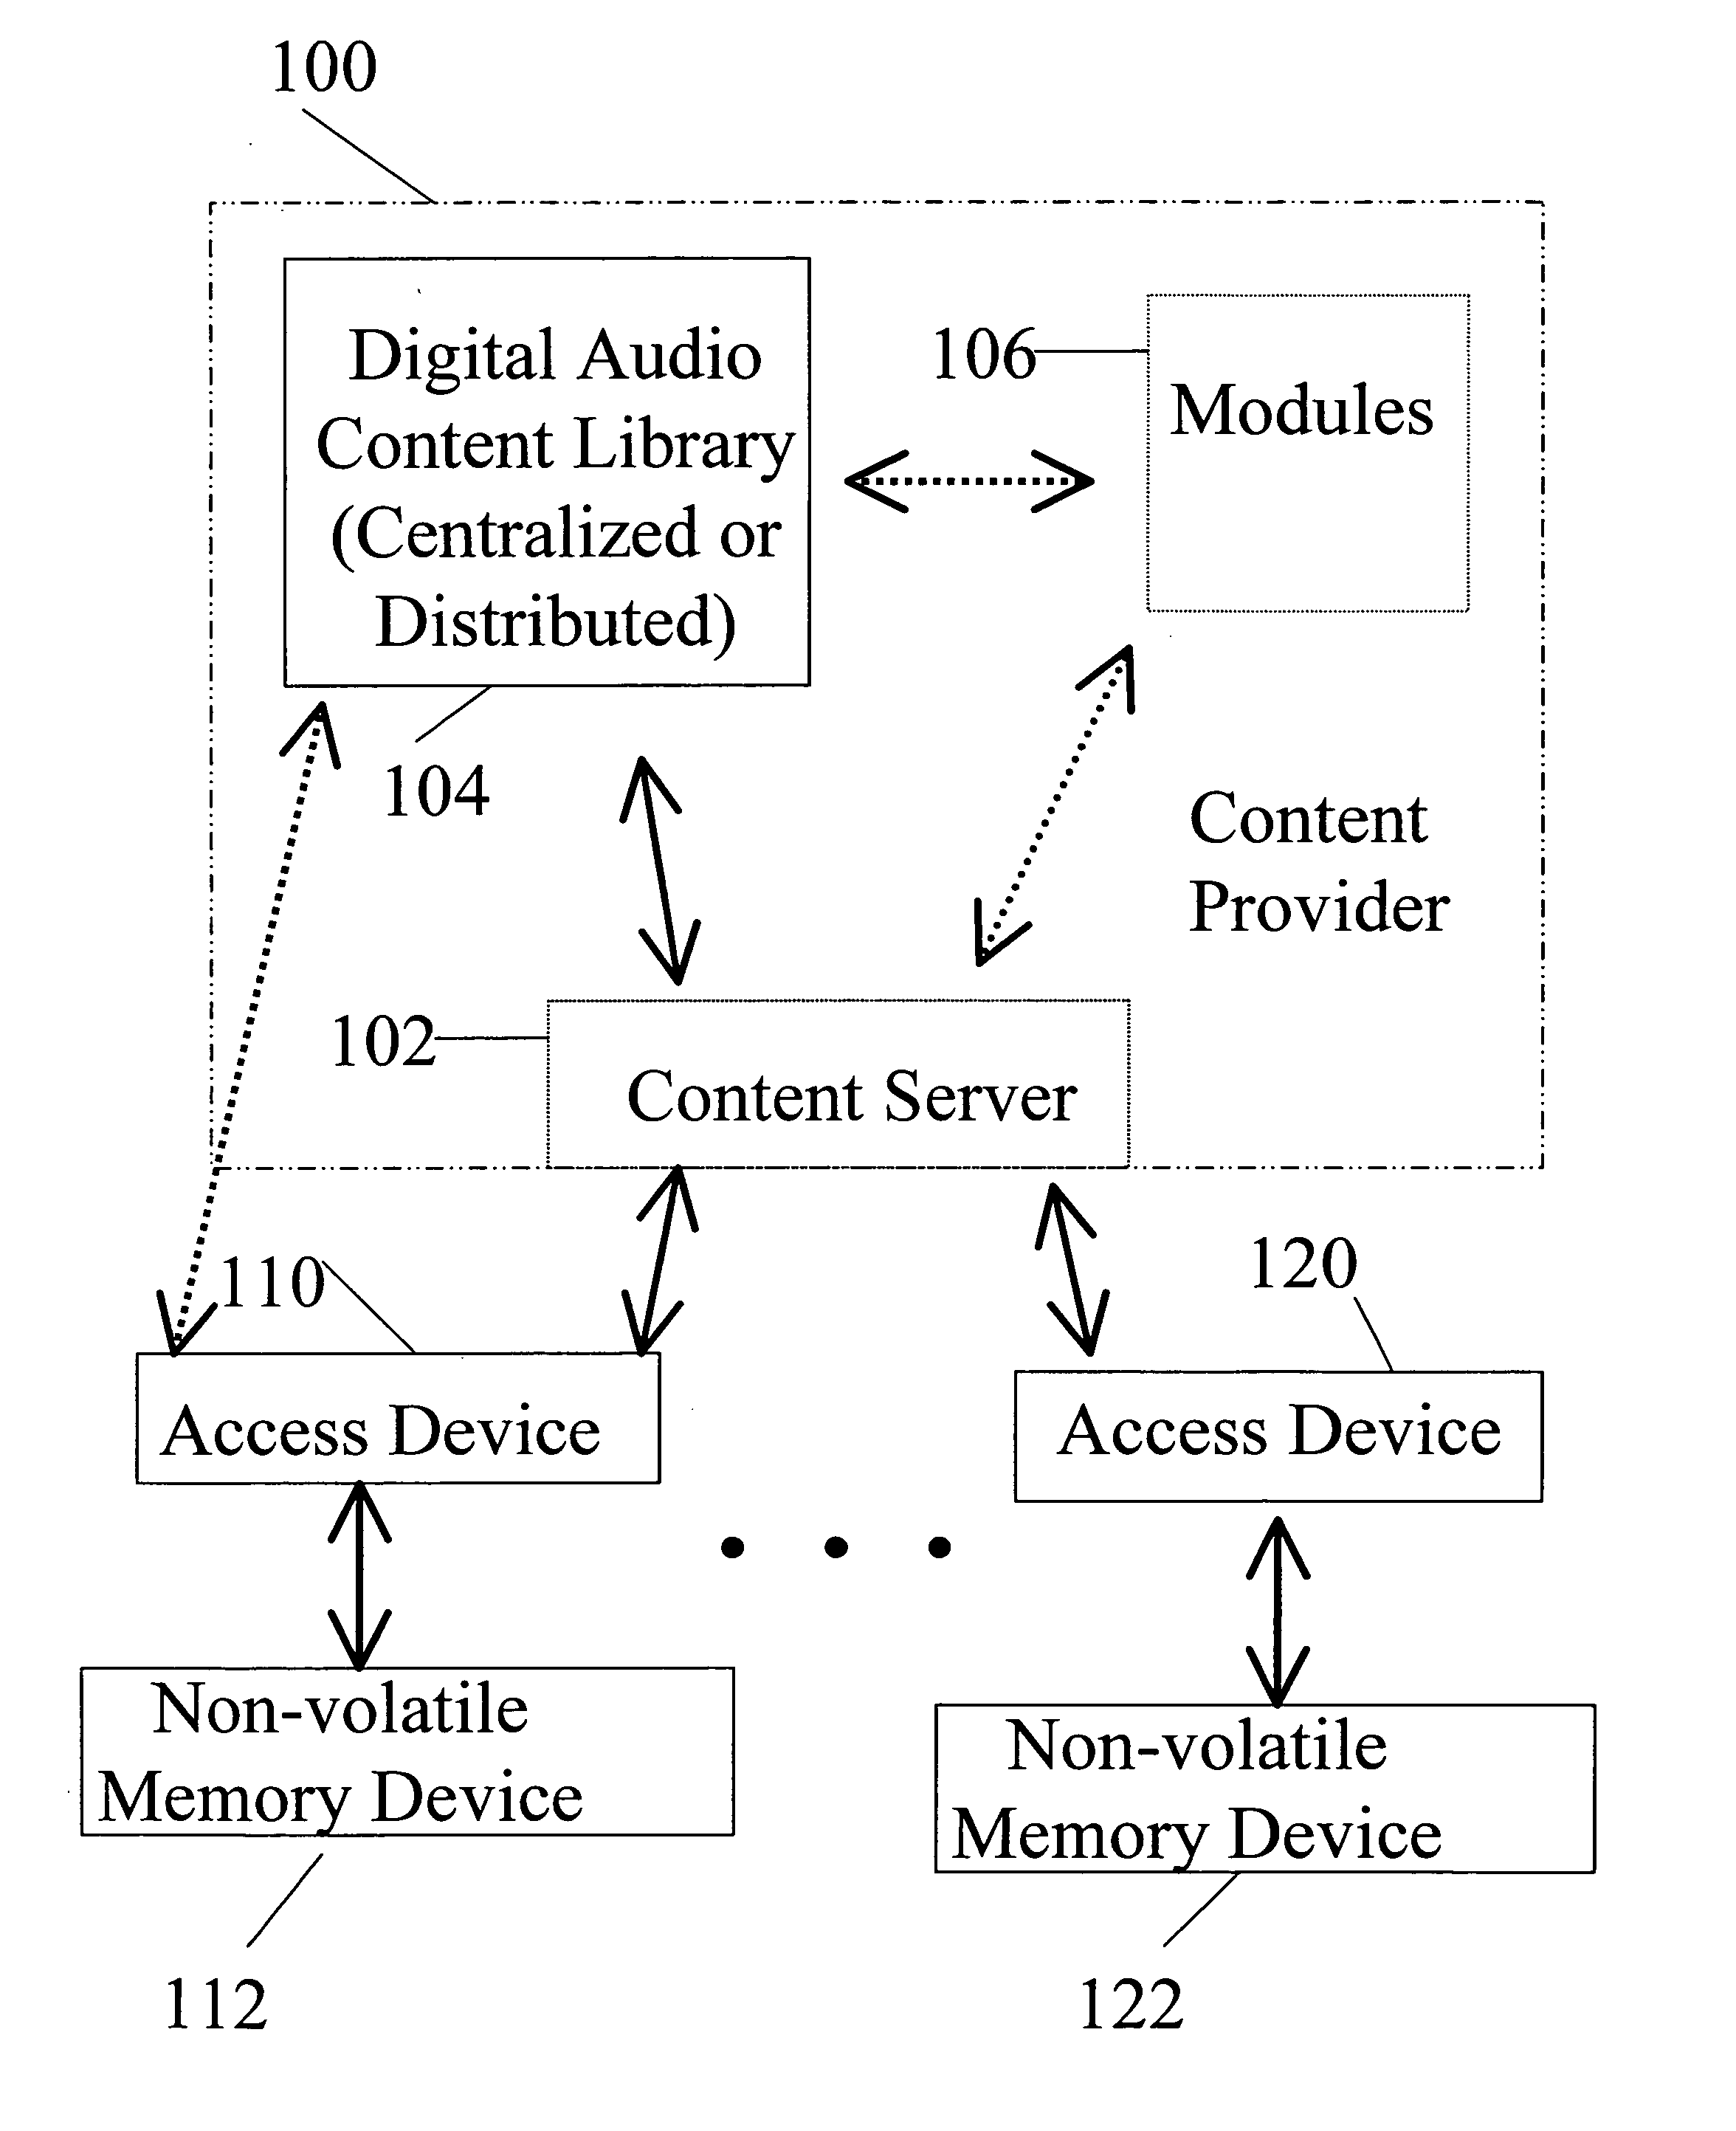 Playback of downloaded digital audio content on car radios